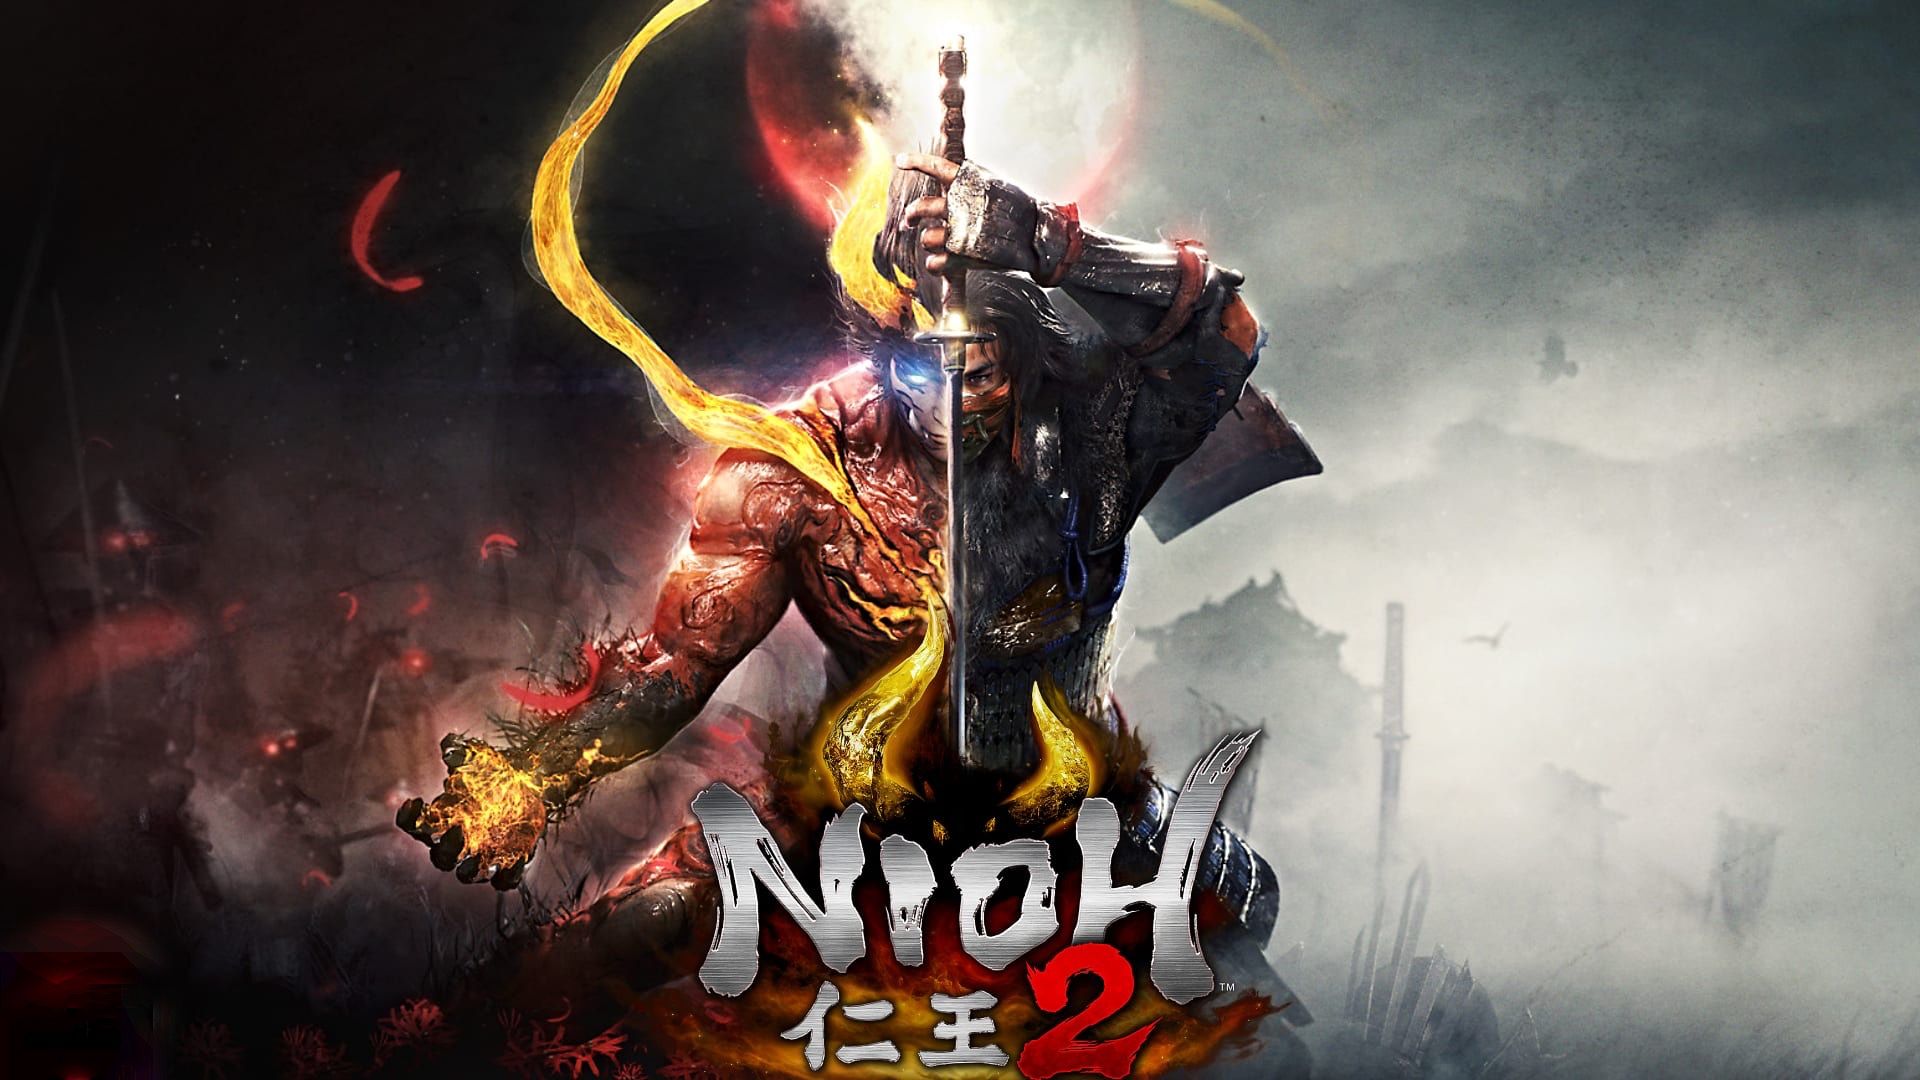 Nioh 2 is offering a 'Last Chance Trial' allowing you to play